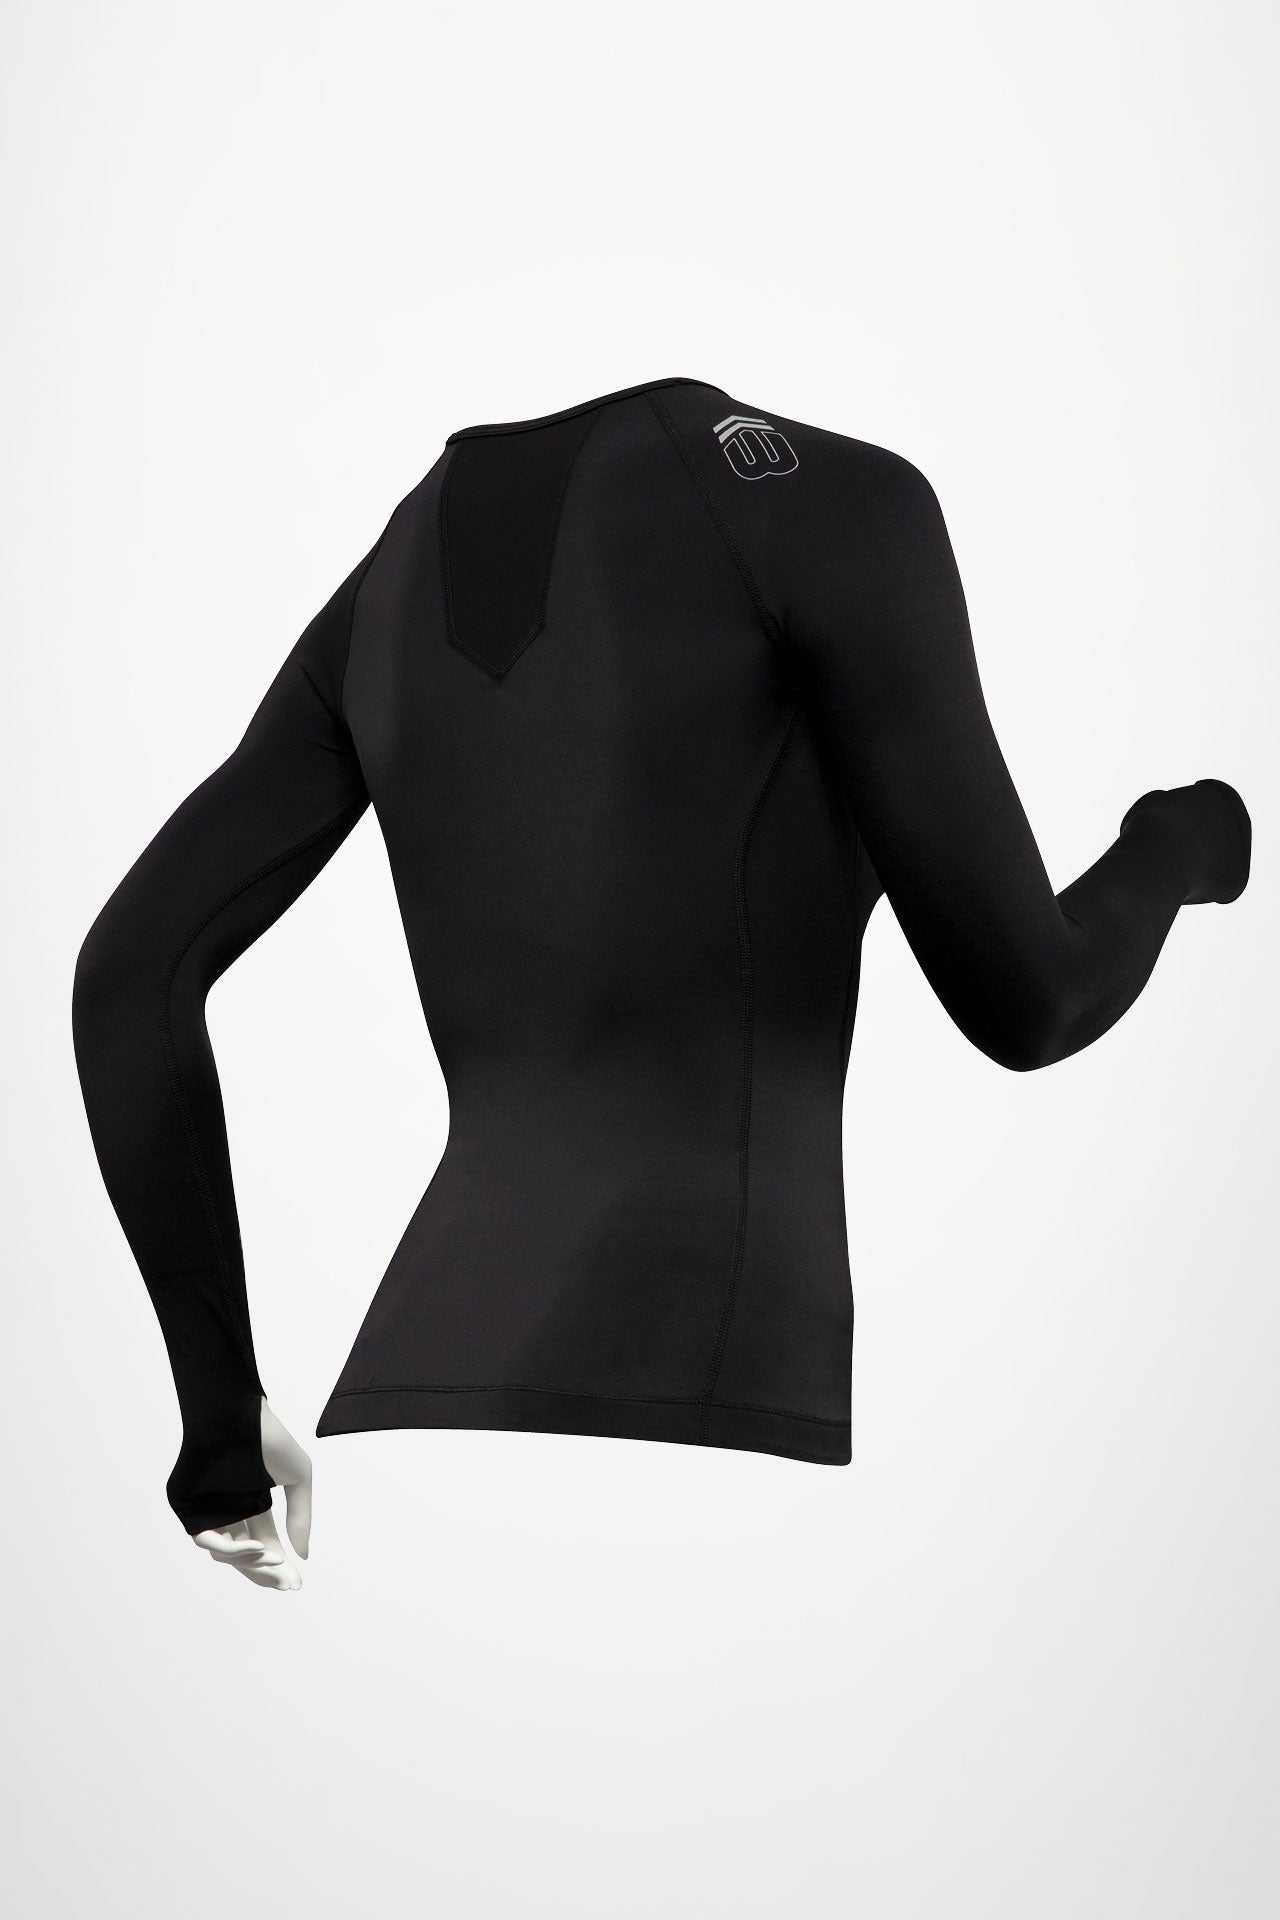  Skins Women's Ry400 Recovery Long Sleeve Top, Black